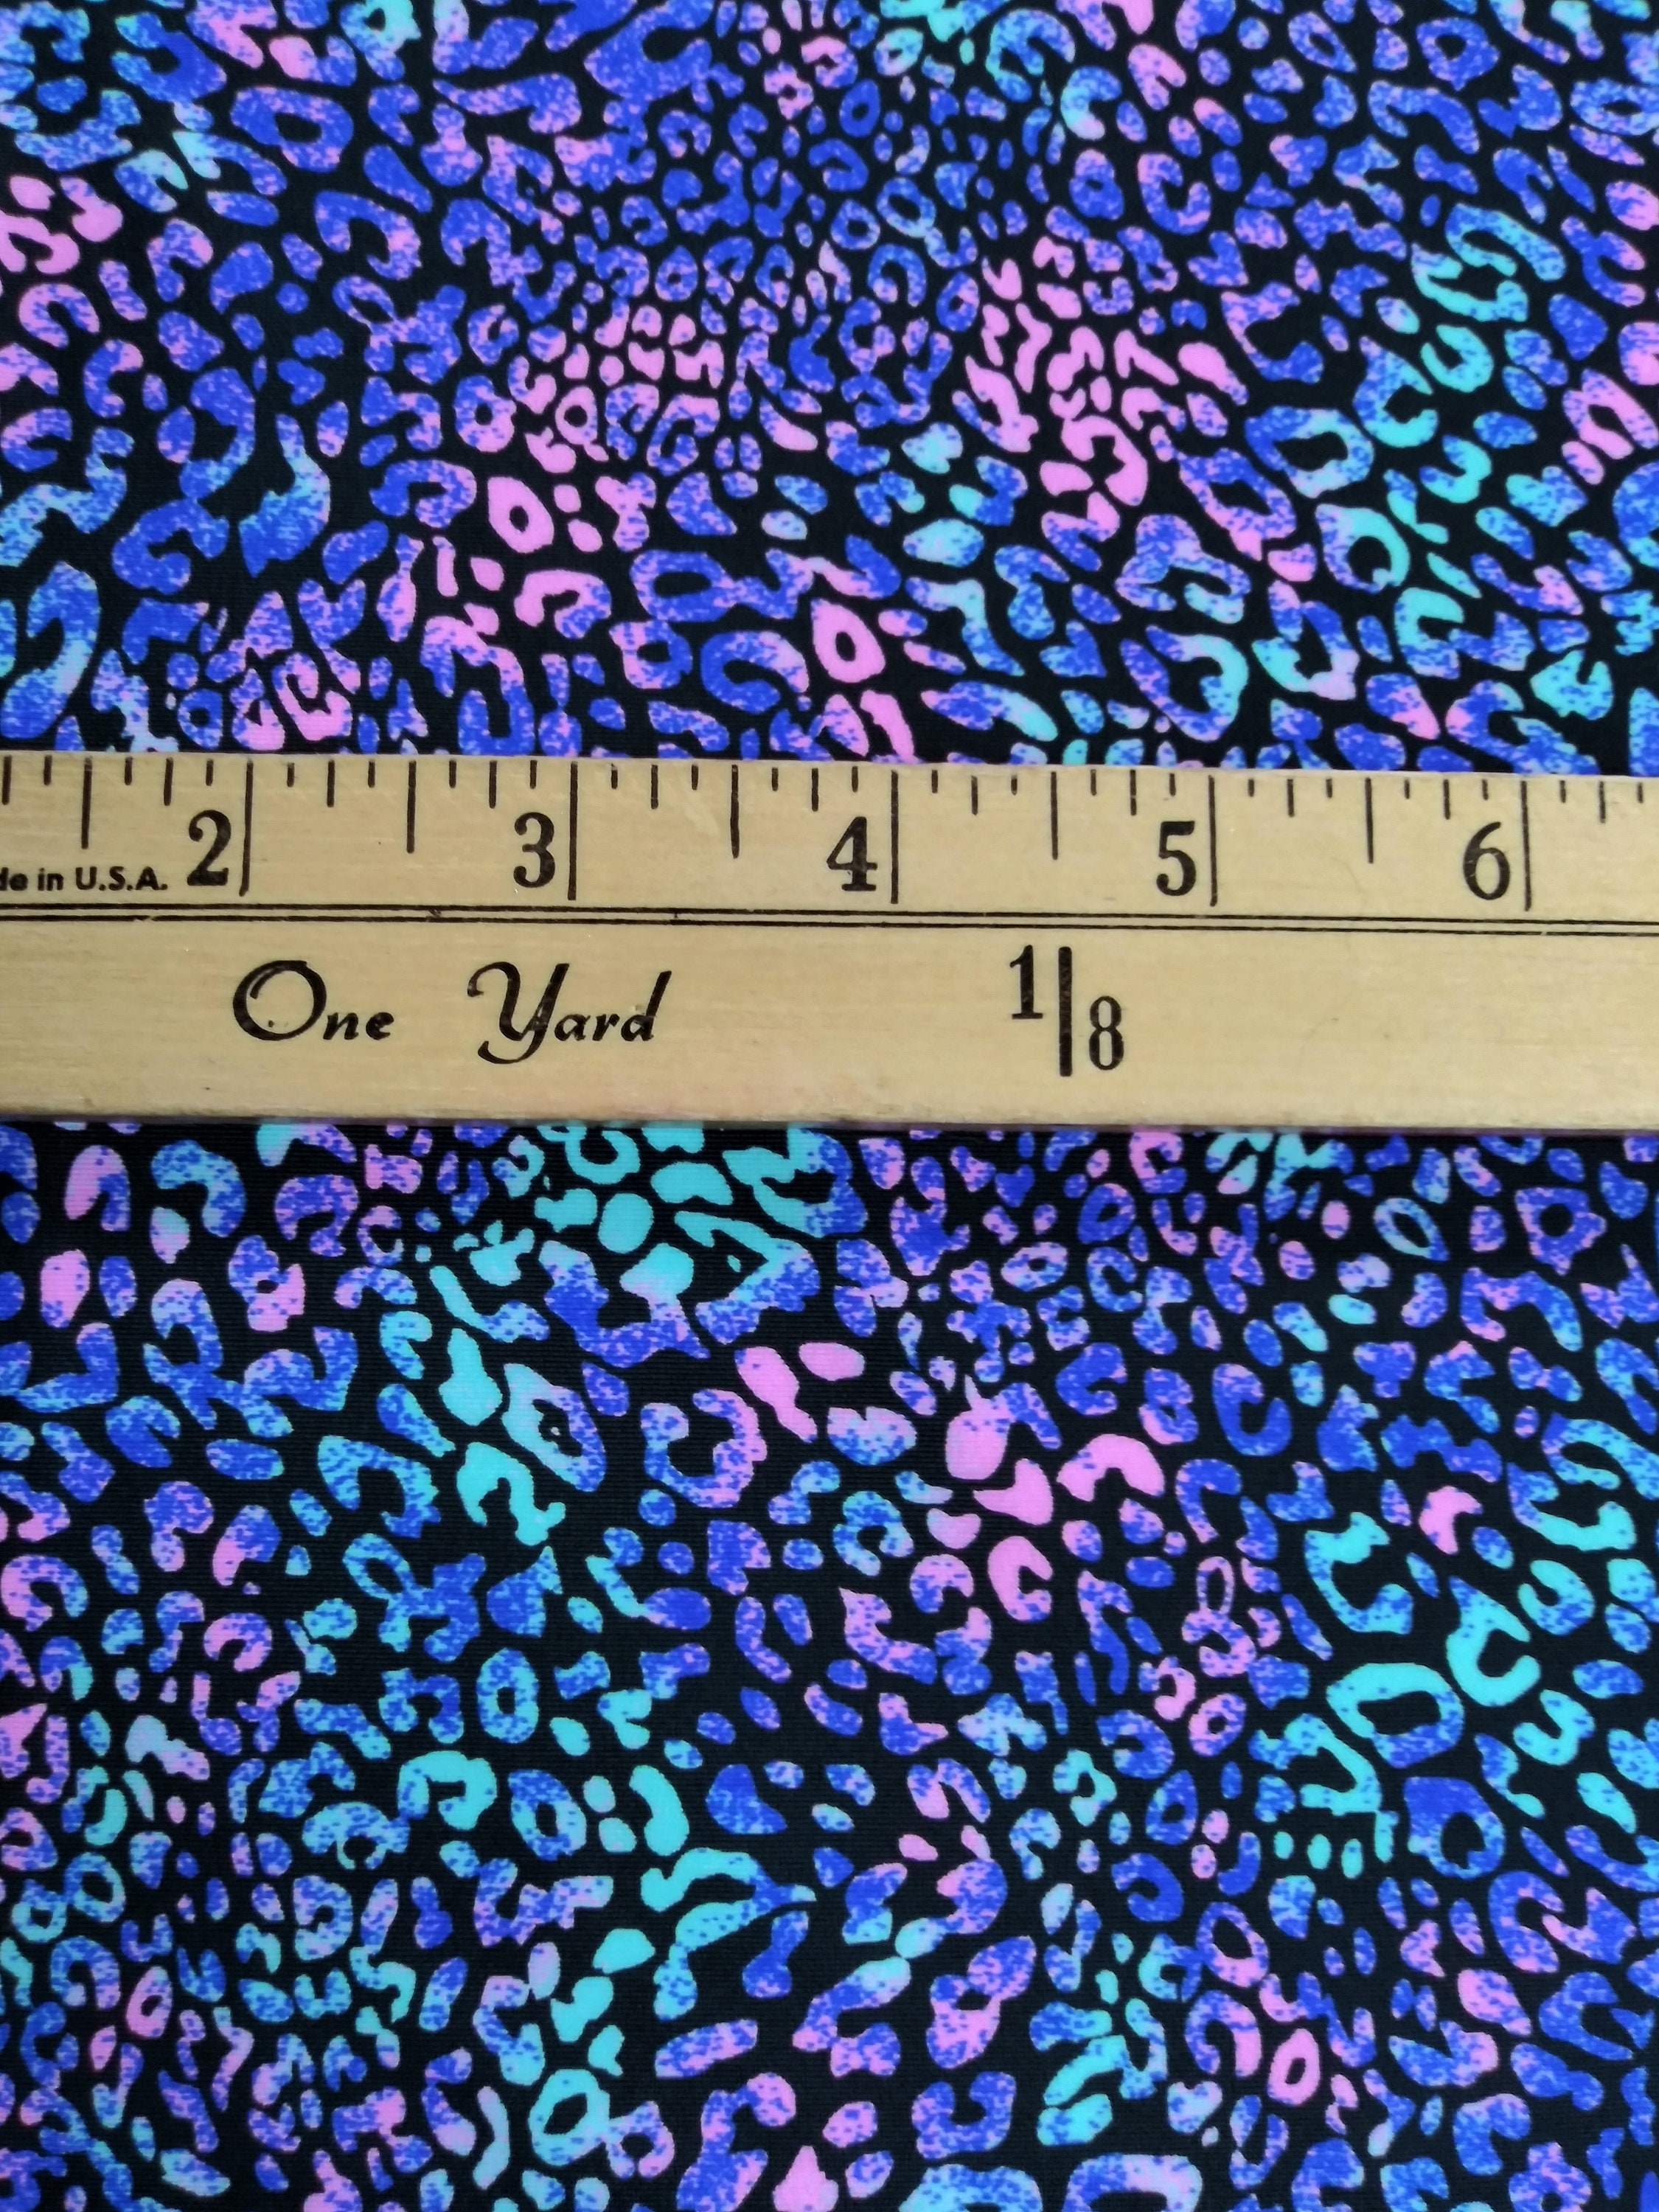 Pastel Leopard fabric Spandex print fabric sold by the forth | Etsy